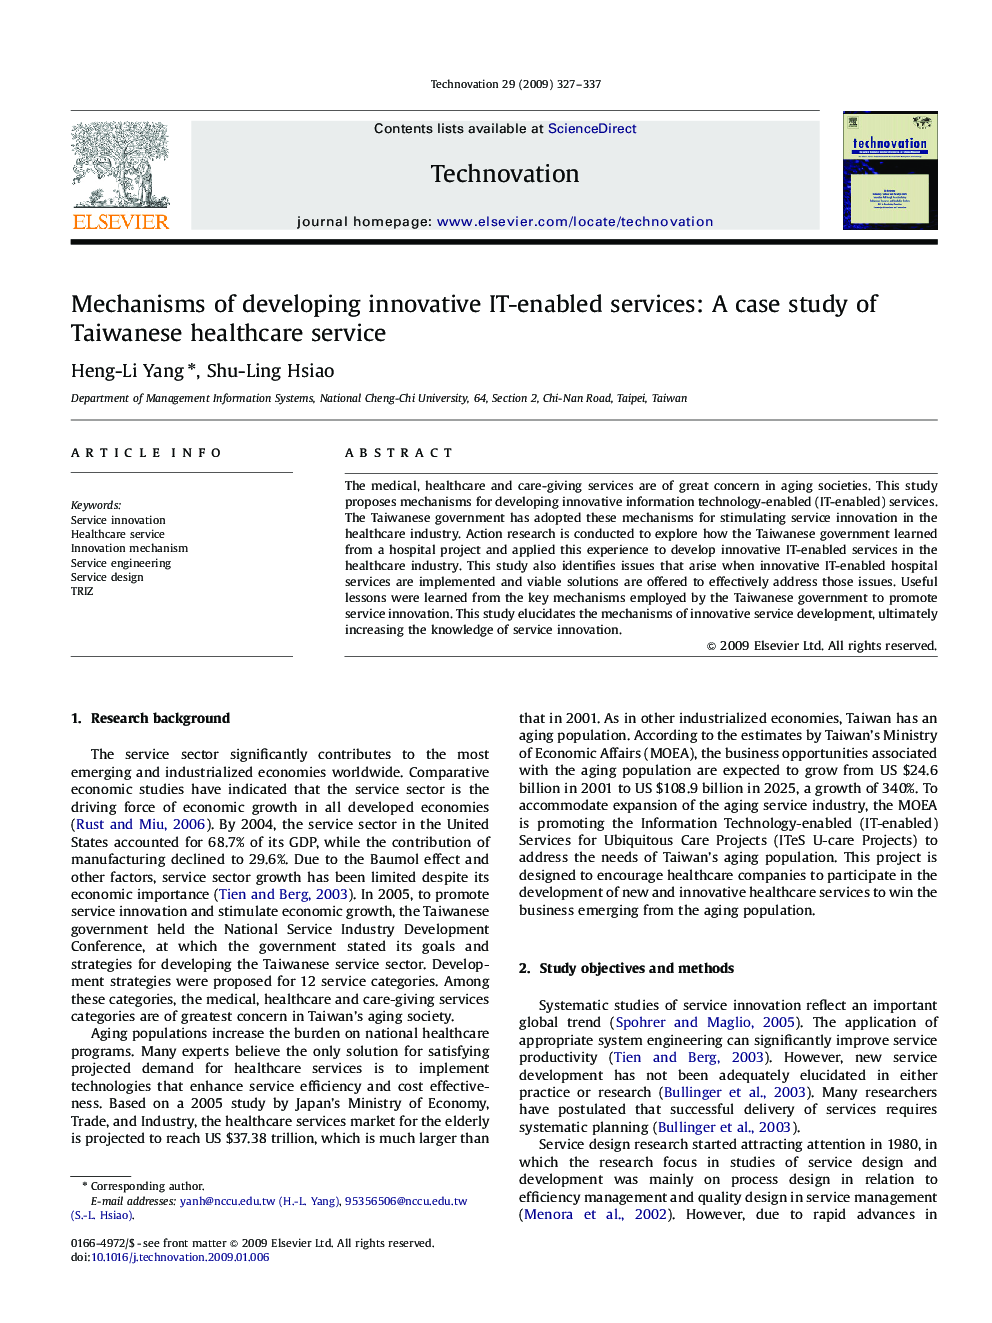 Mechanisms of developing innovative IT-enabled services: A case study of Taiwanese healthcare service